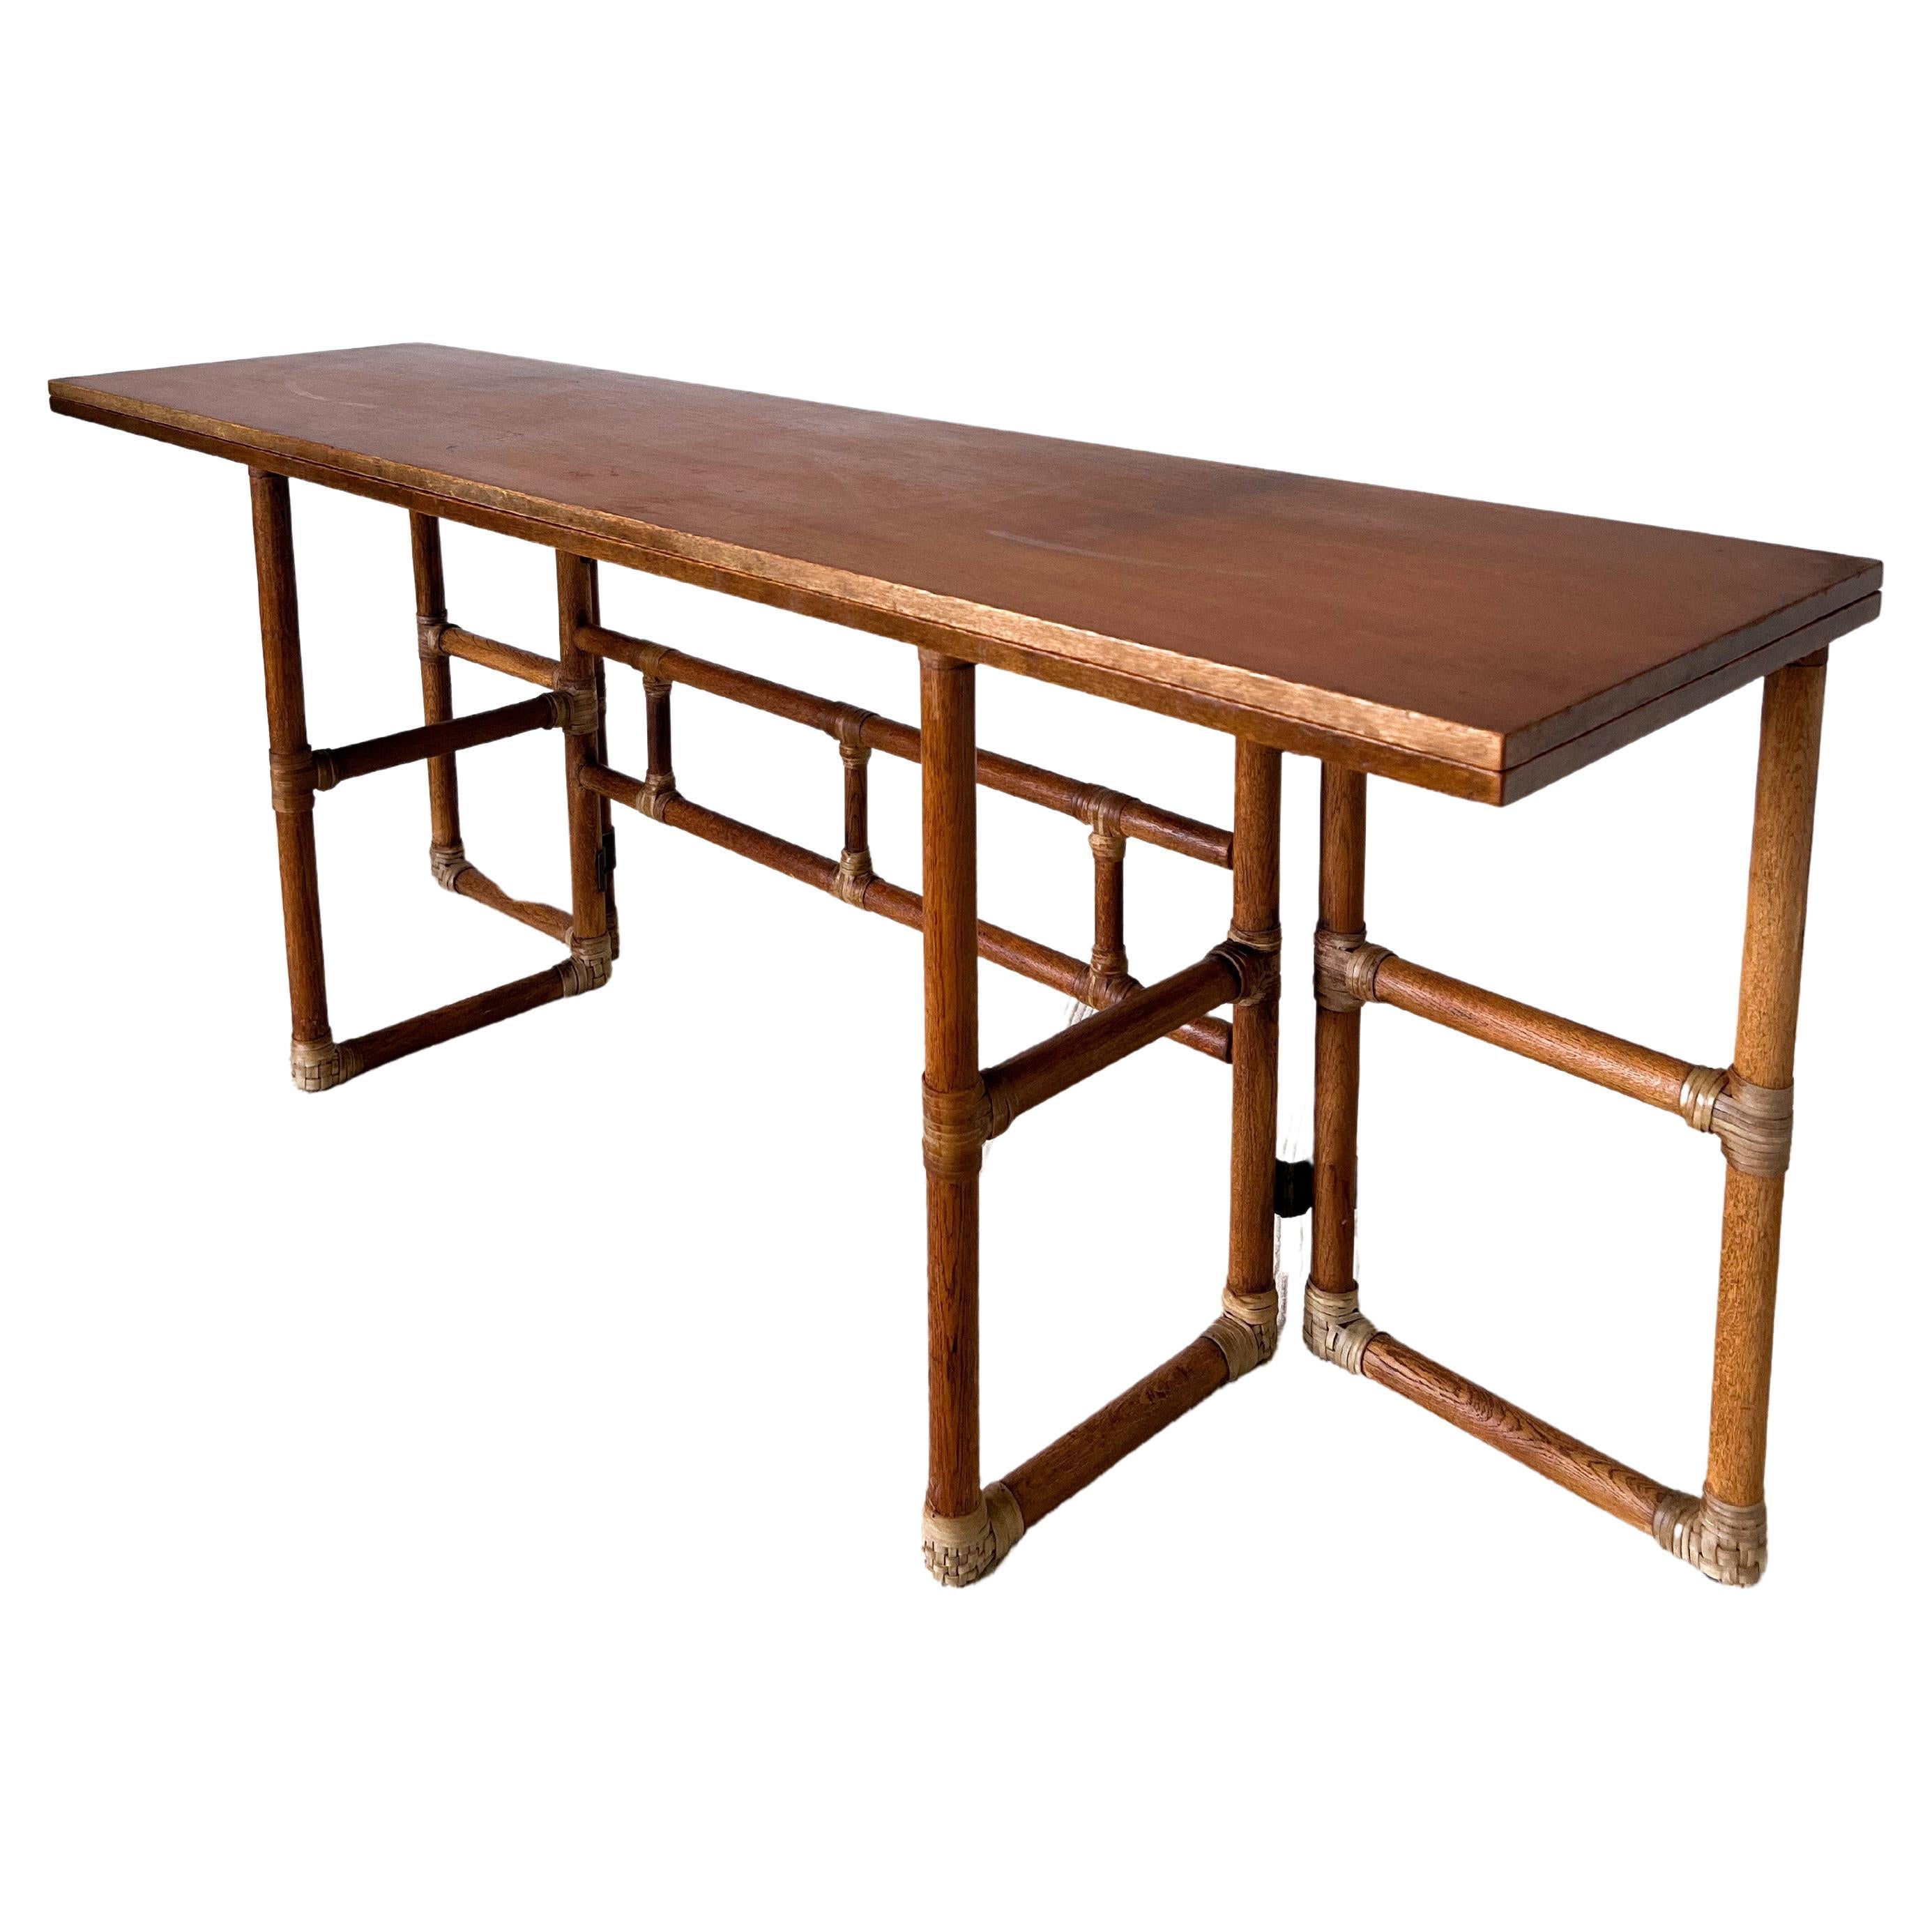 1970s Bamboo Flip-Top Dining Table by McGuire